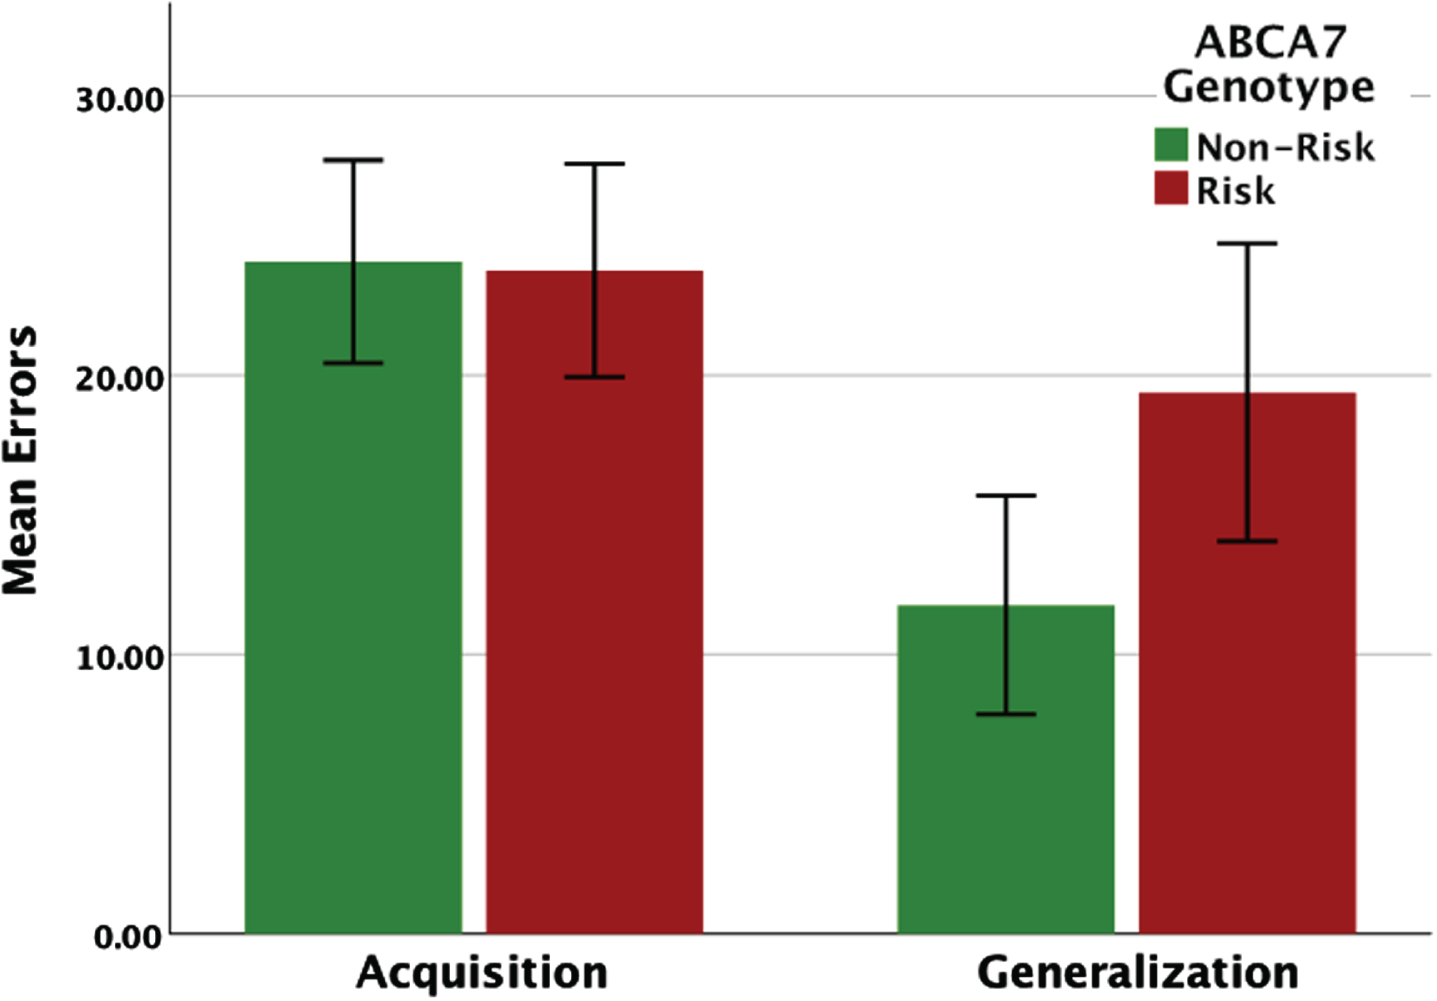 Performance (total errors) on the concurrent discrimination and generalization task based on ABCA7 genotype. While there were no group differences on the initial learning (acquisition phase), carriers of the AG/GG risk genotype made significantly more errors during generalization.